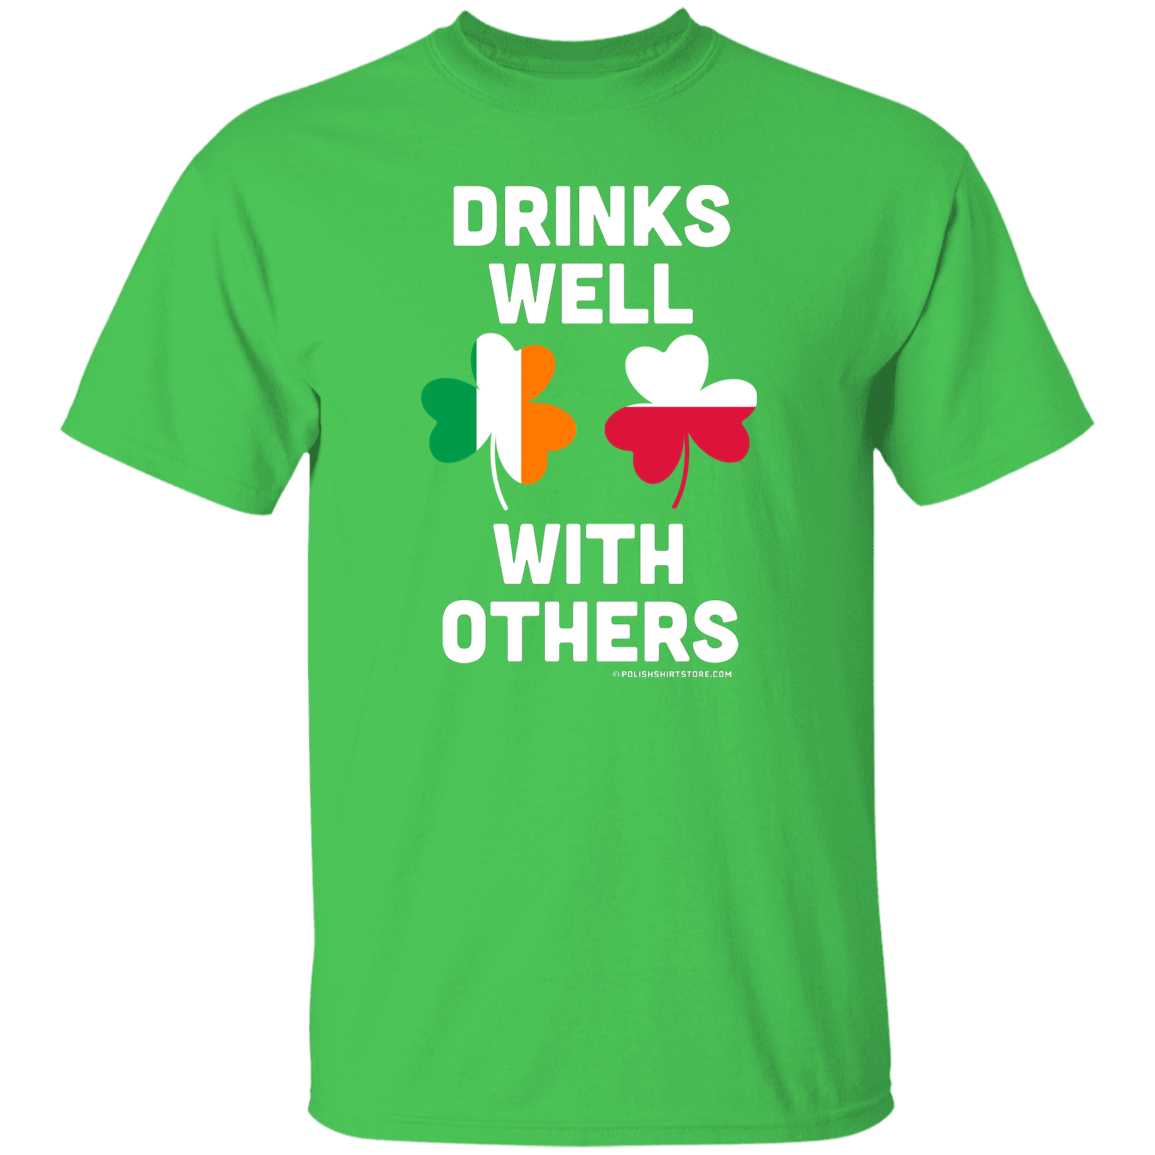 Drinks Well With Others Apparel CustomCat G500 5.3 oz. T-Shirt Electric Green S